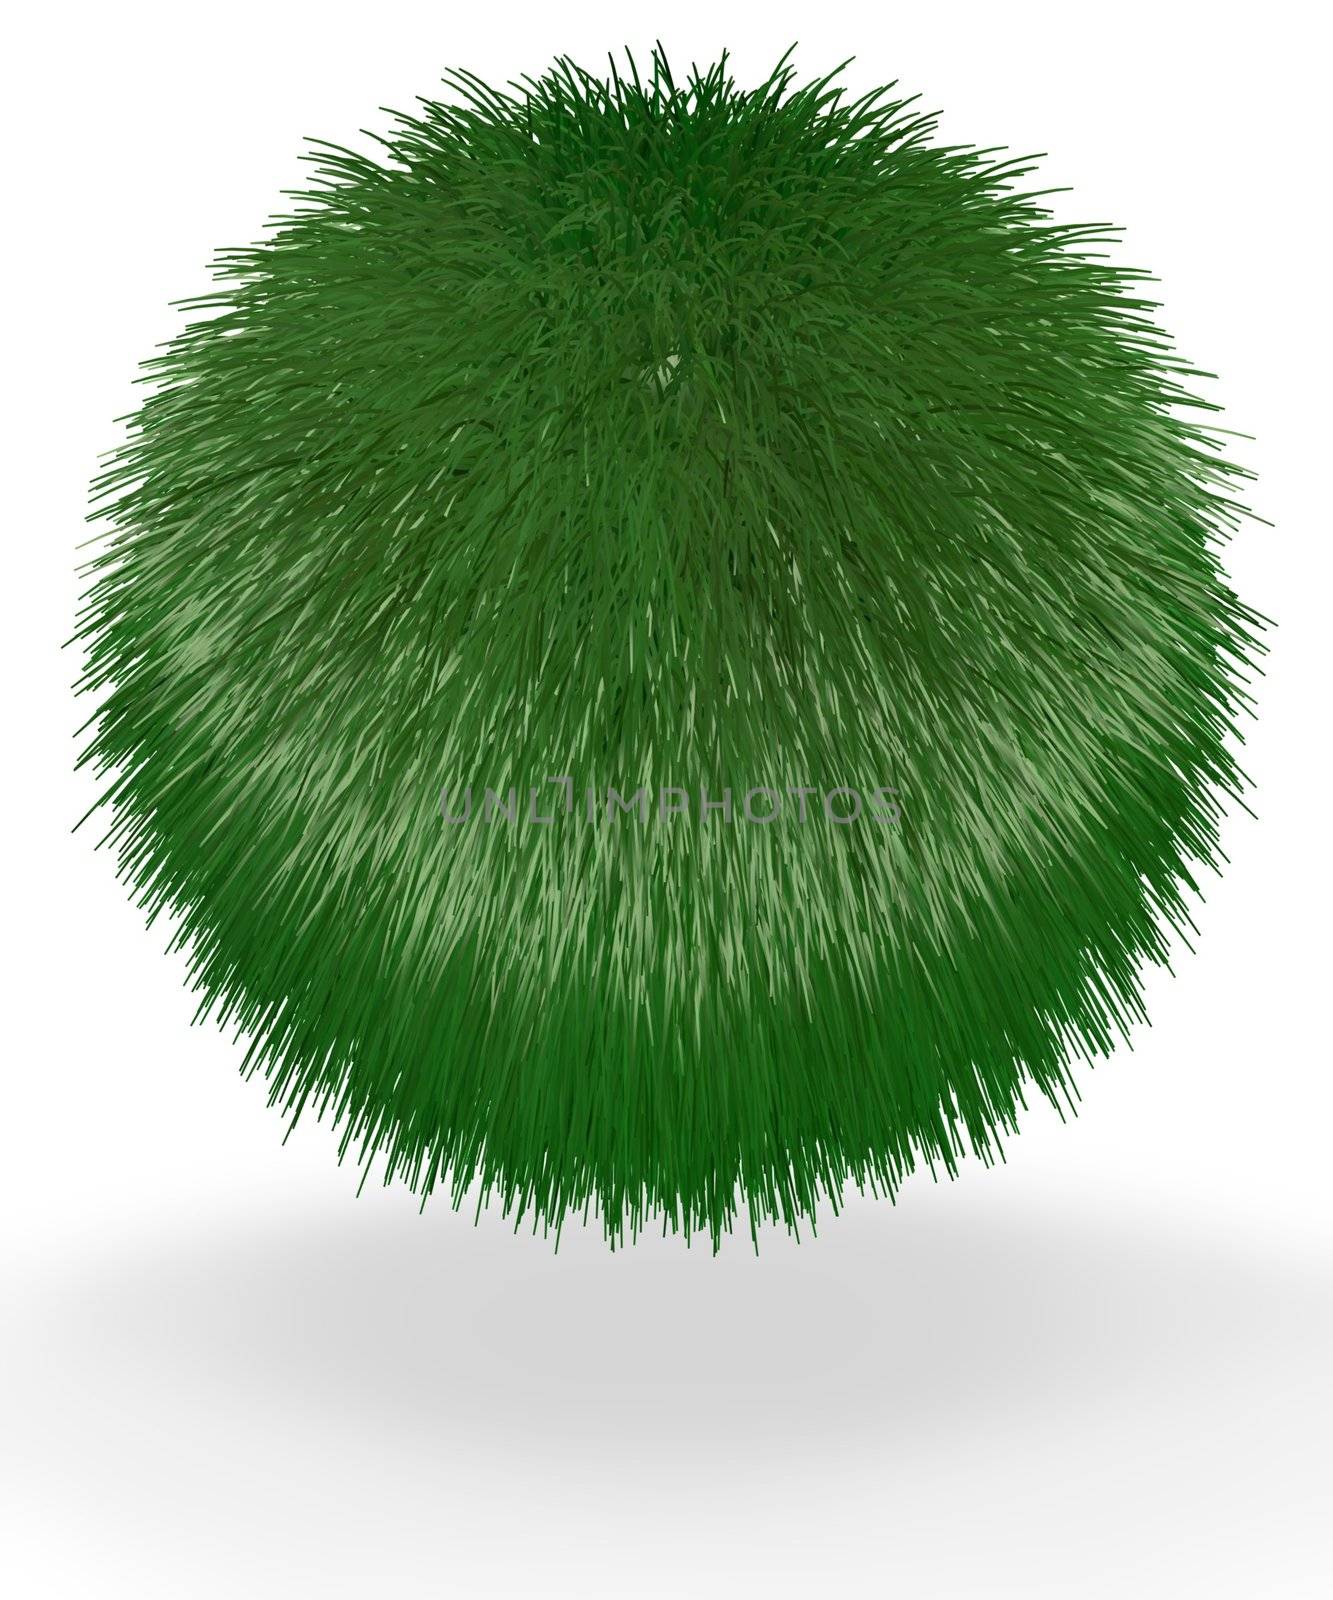 A ball of short grass suspended in the air. Good concept for most green and earth preservation concepts. 